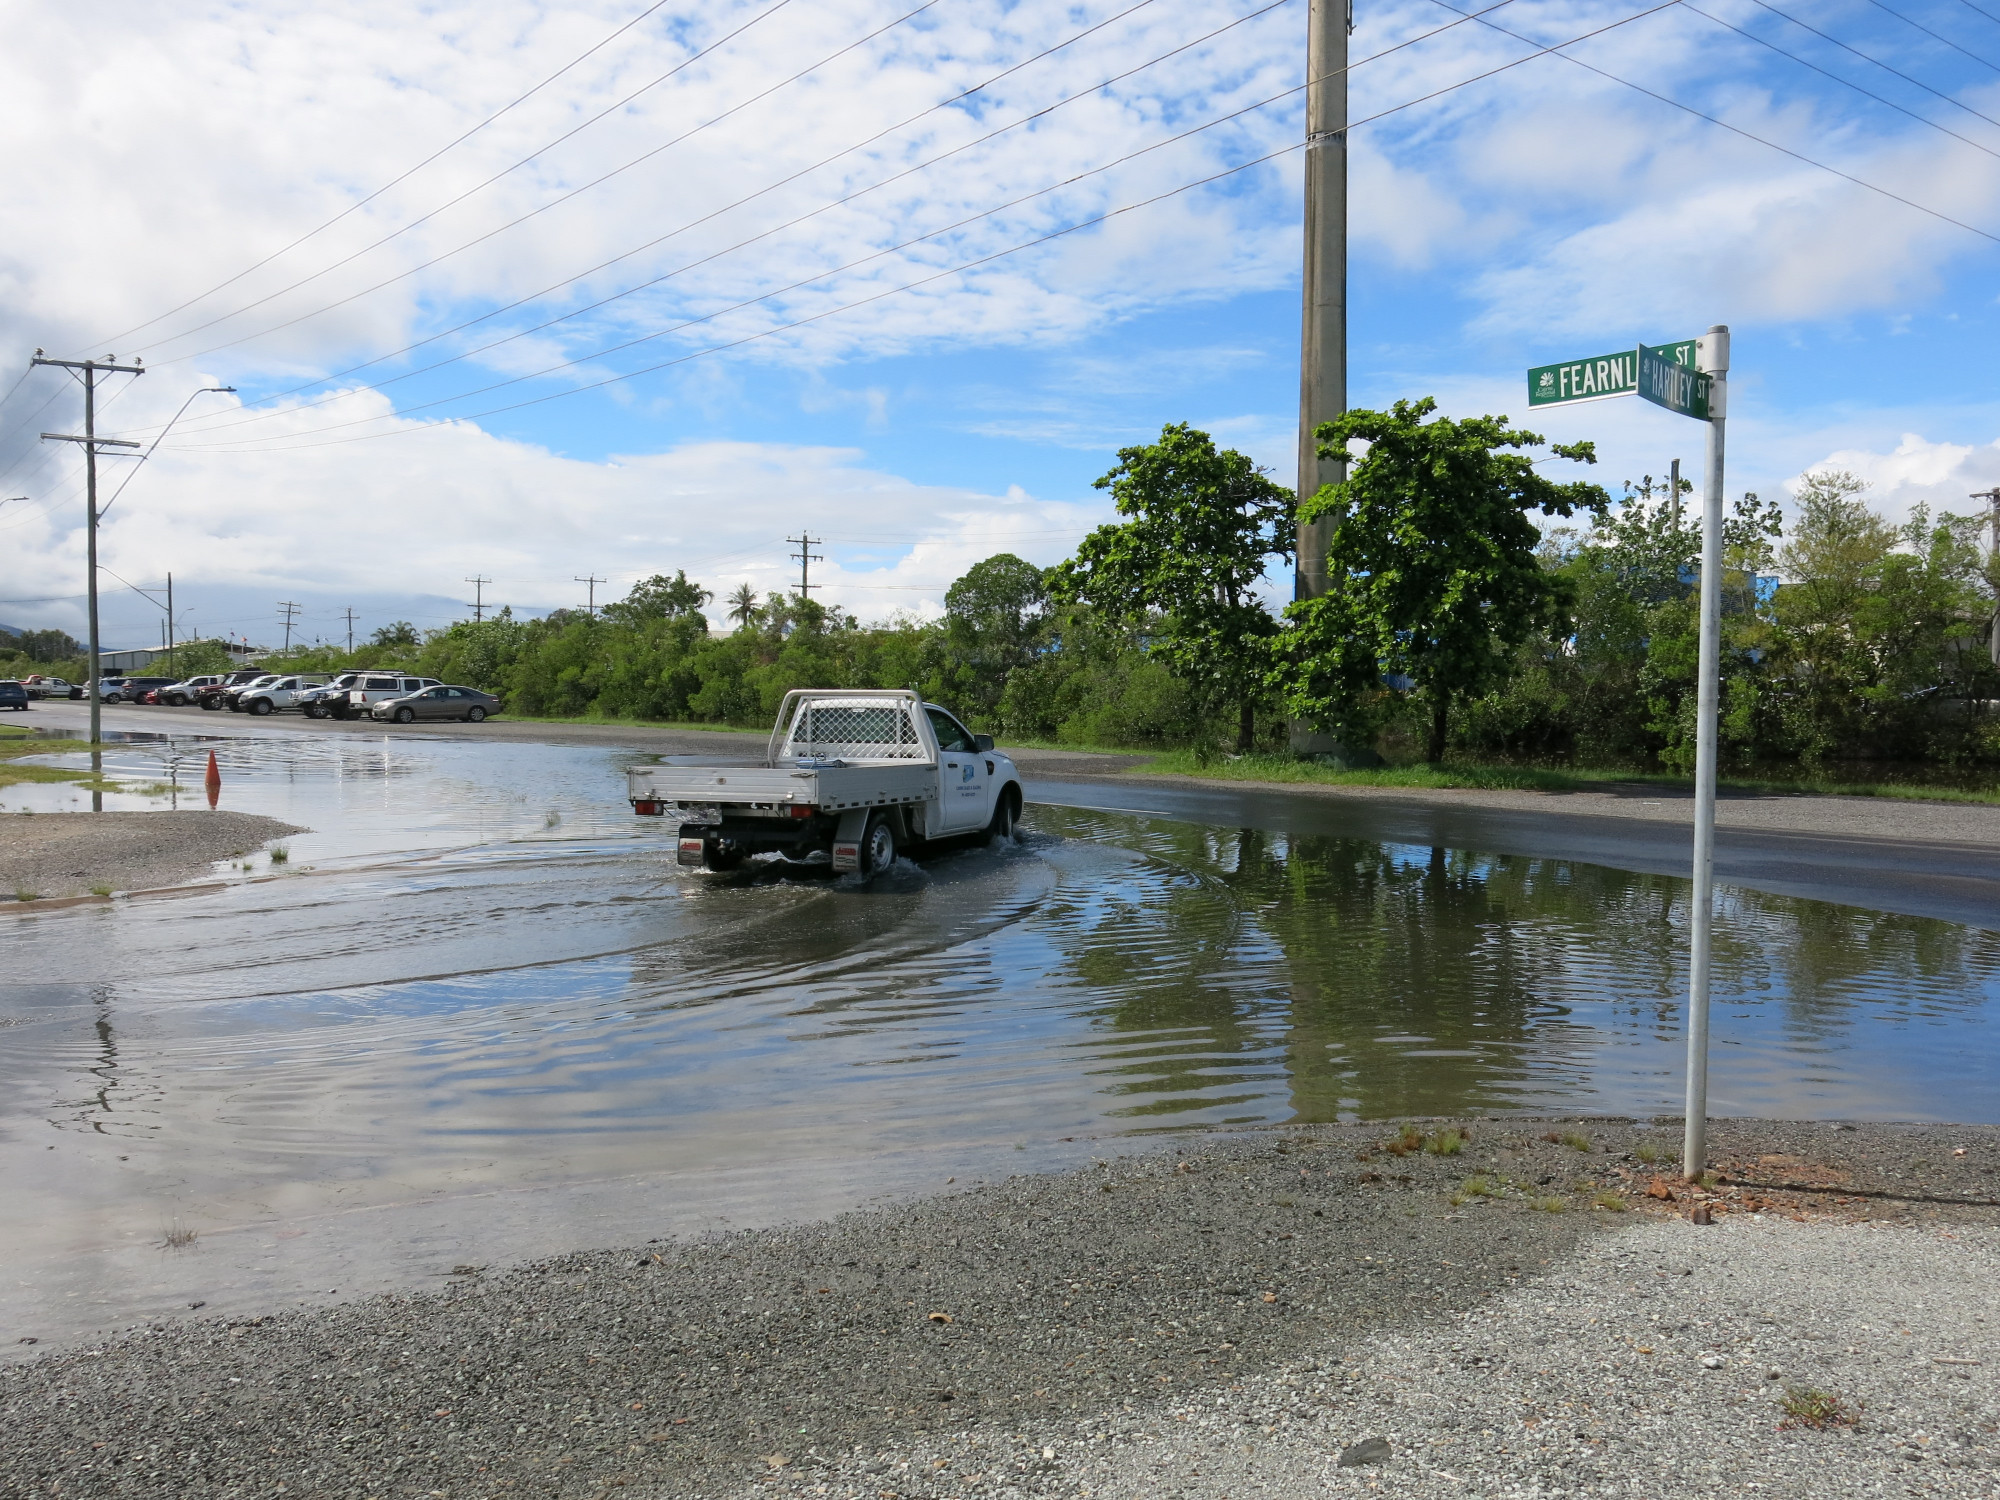 A vehicle drives through king tide floodwaters on Fearnley street in Portsmith. Motorists are reminded that tidal flooding is saltwater, which can damage cars on contact. PHOTO: Tanya Murphy